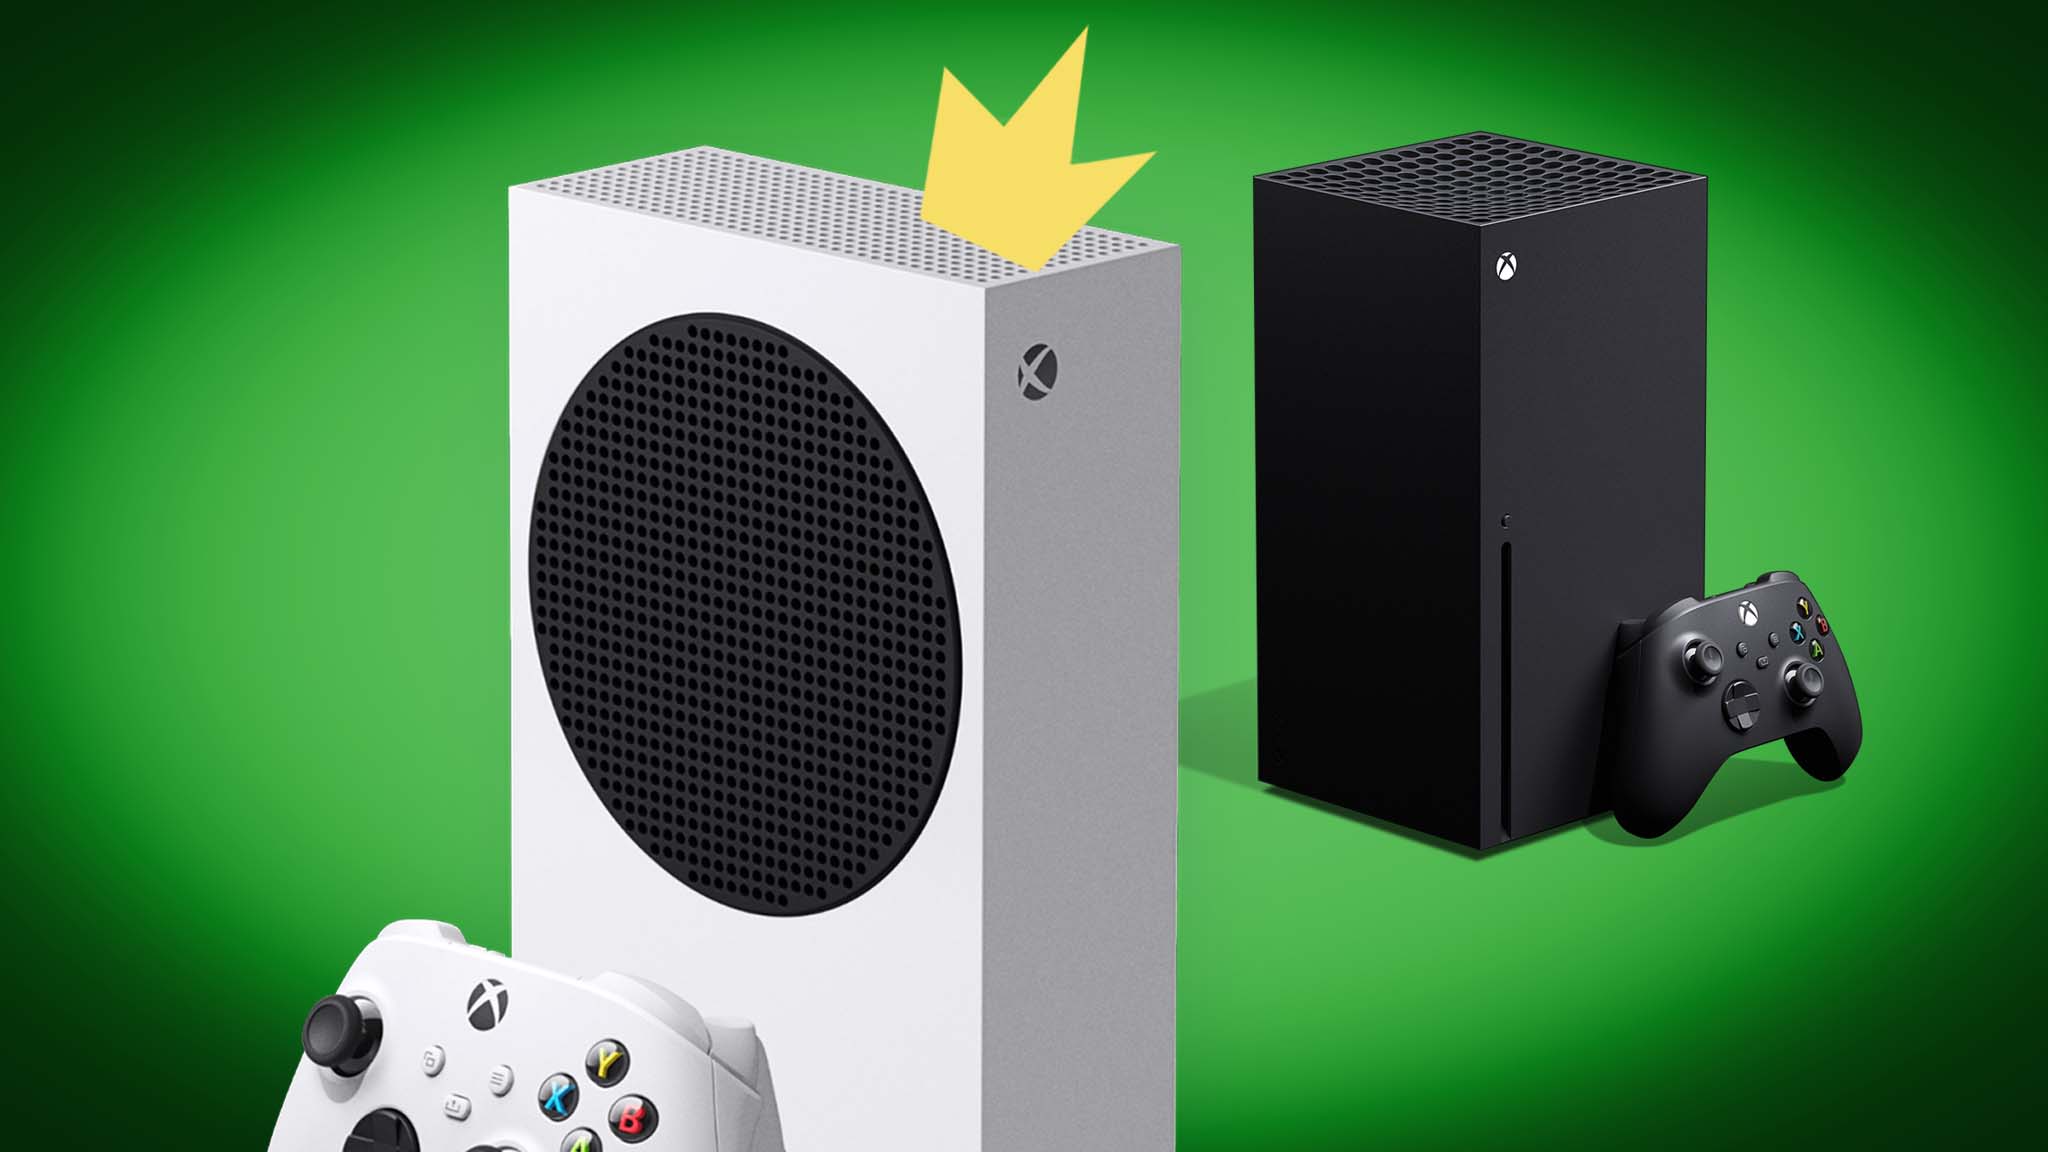 Microsoft Xbox Series X, Xbox Series S prices and release date leaked